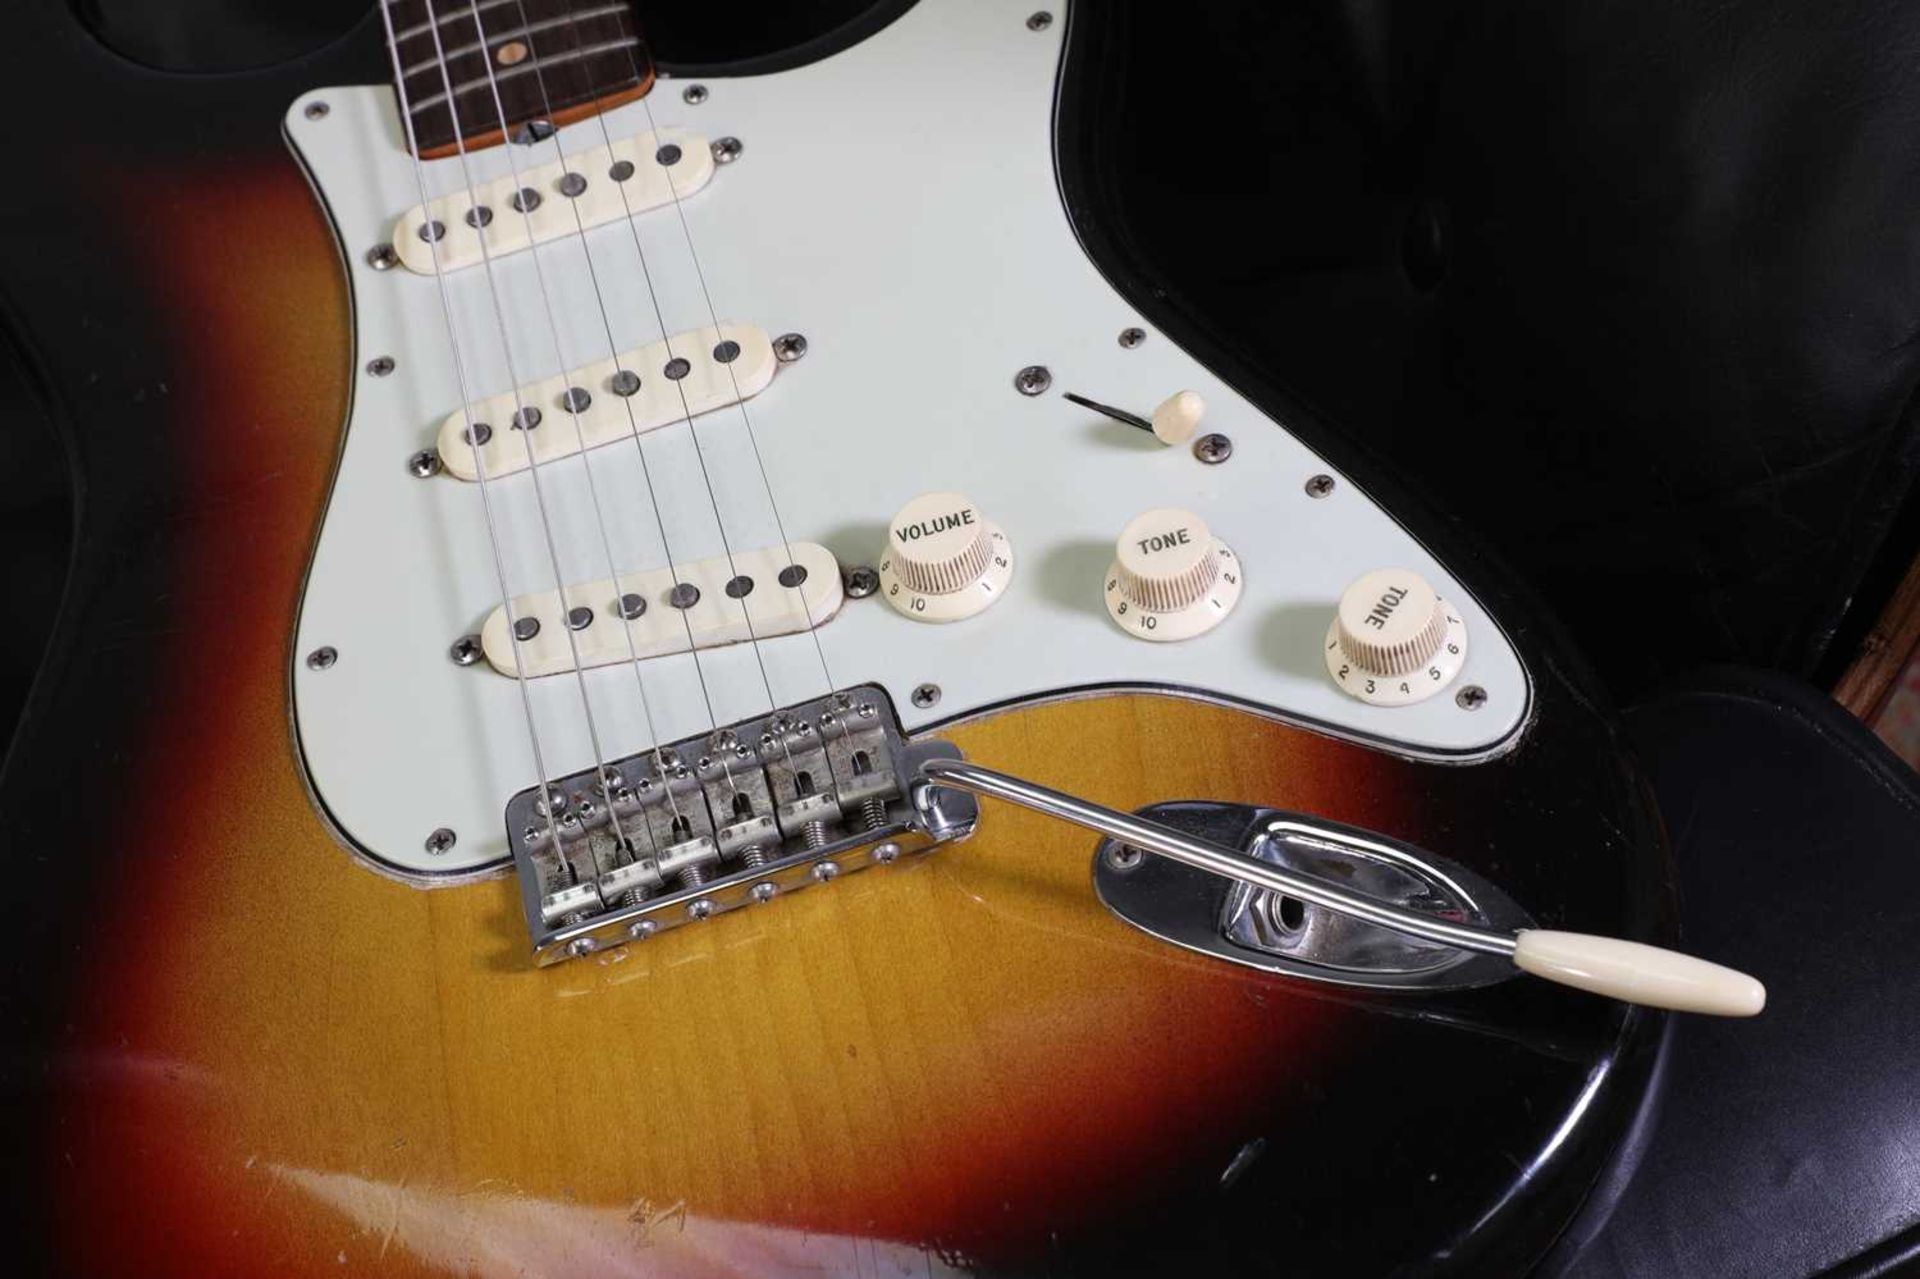 A 1963 Fender Stratocaster electric guitar, - Image 9 of 32